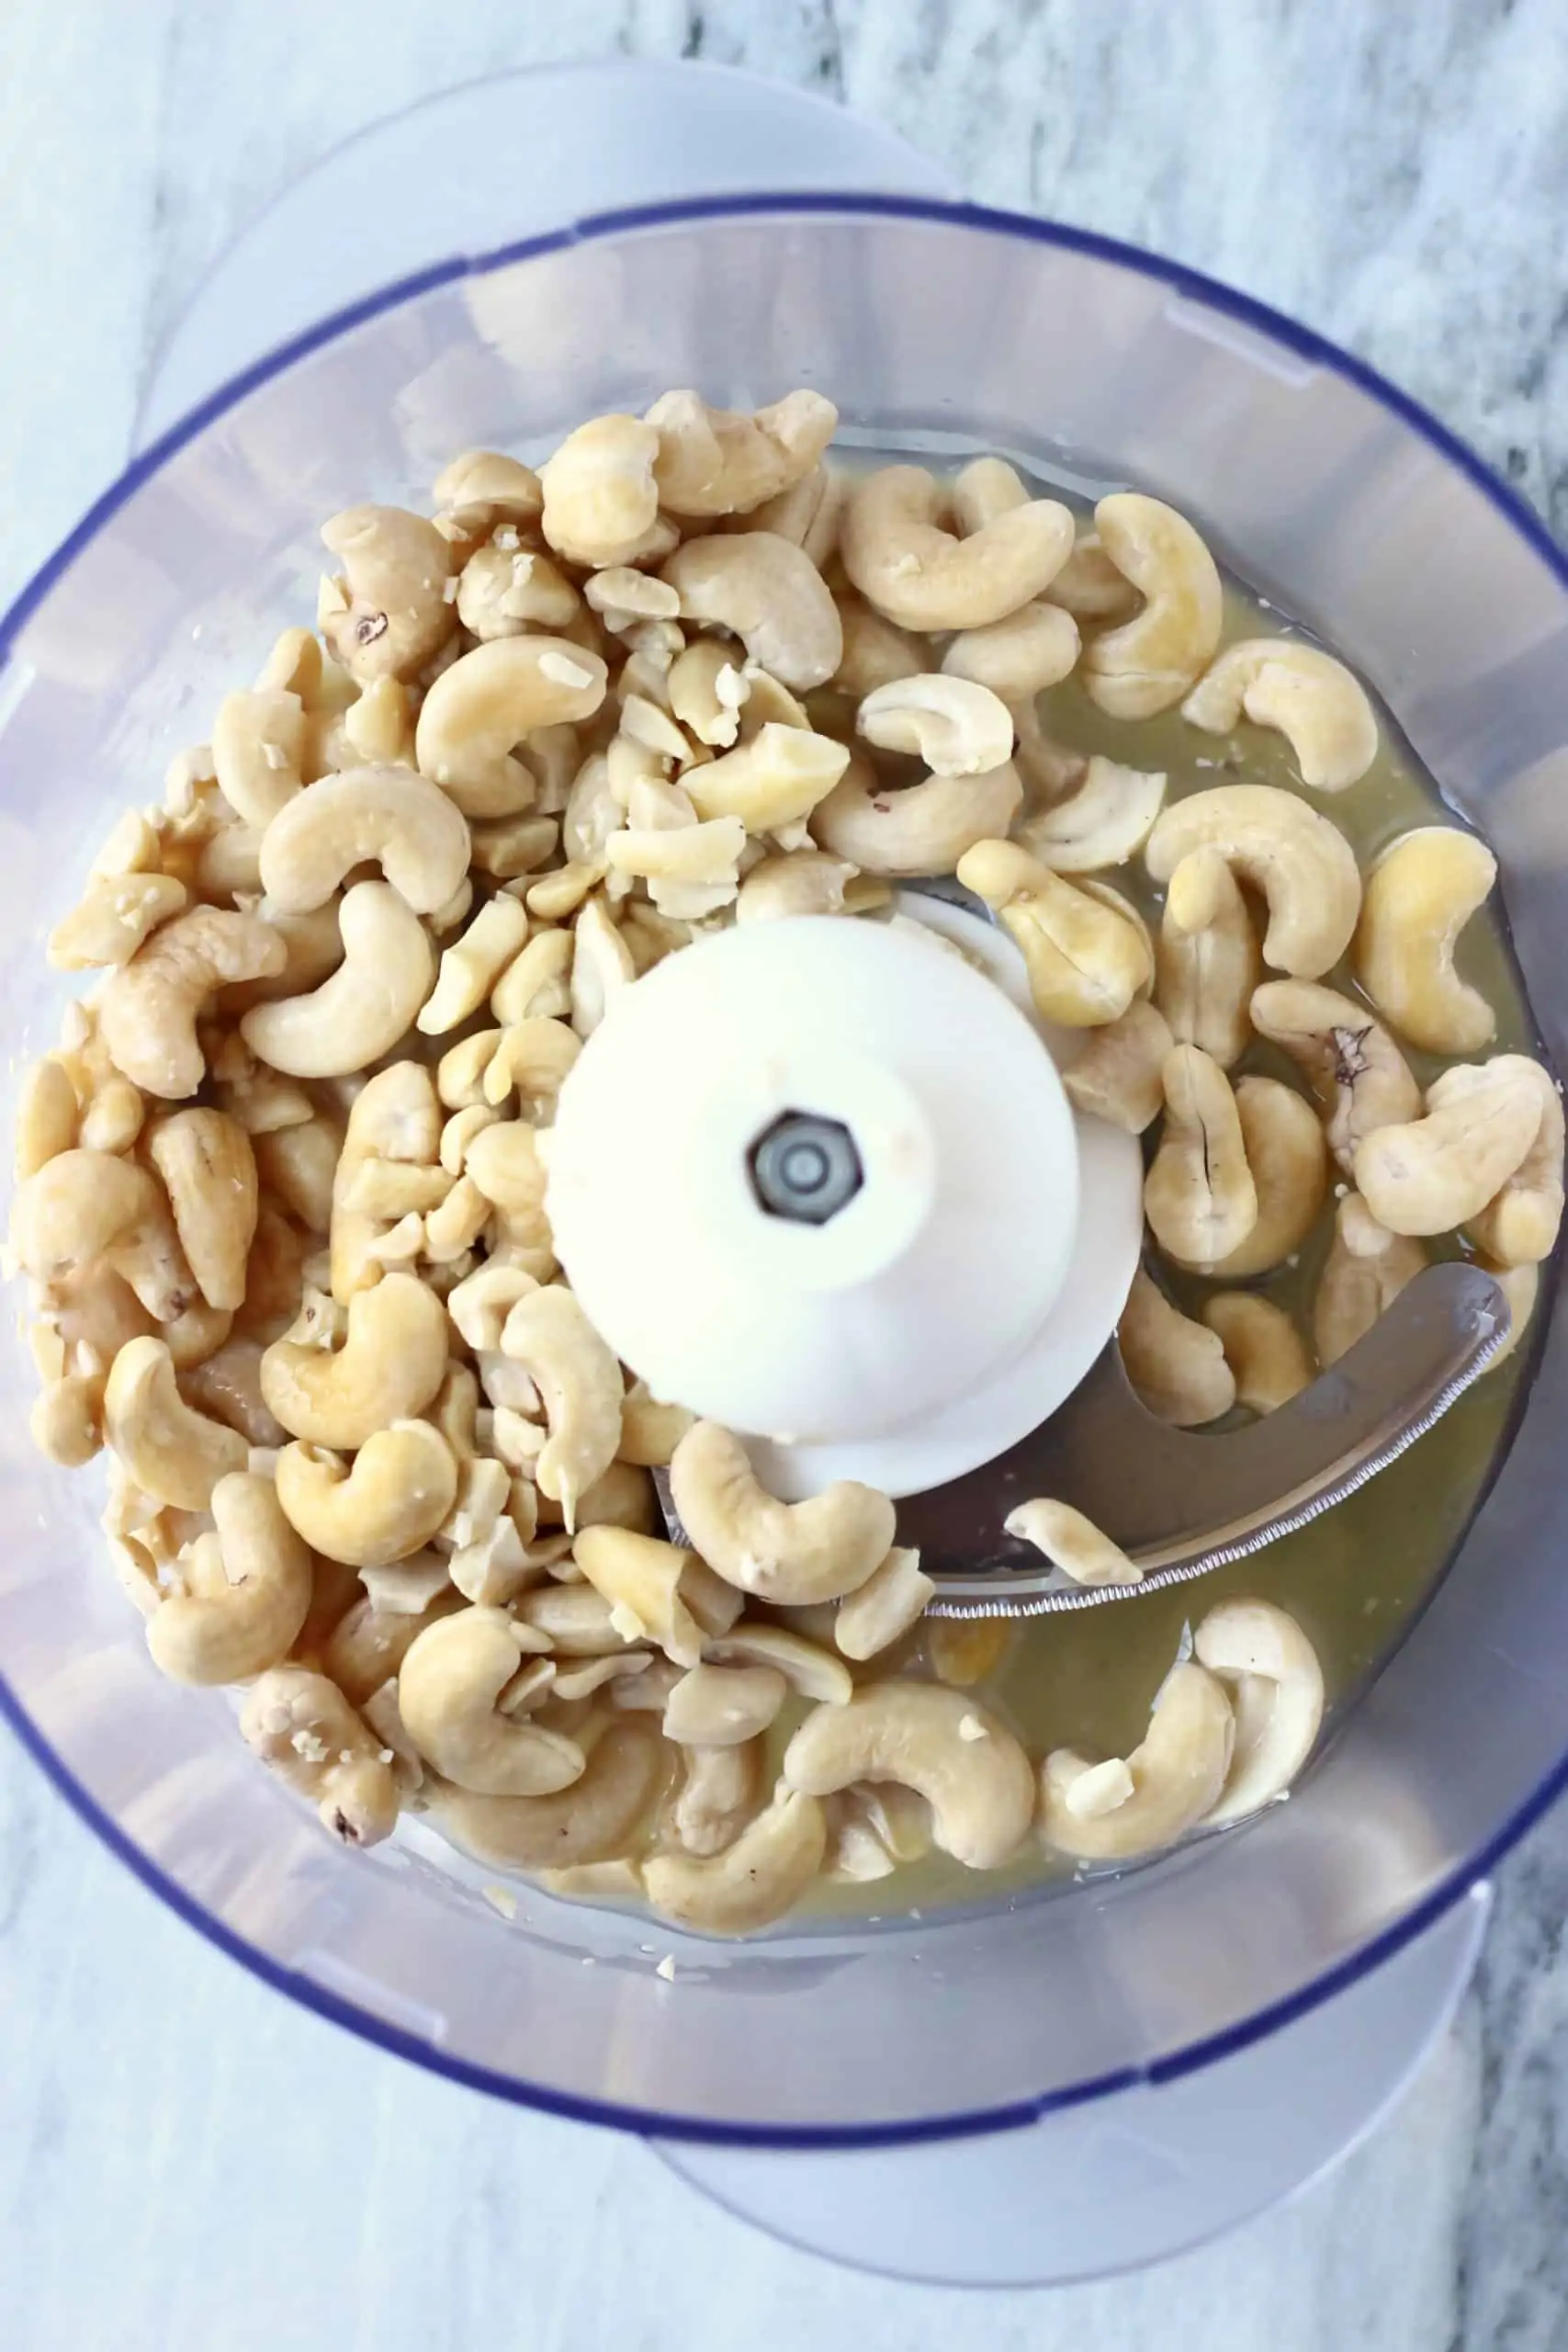 Cashew nuts, maple syrup and almond milk in a food processor